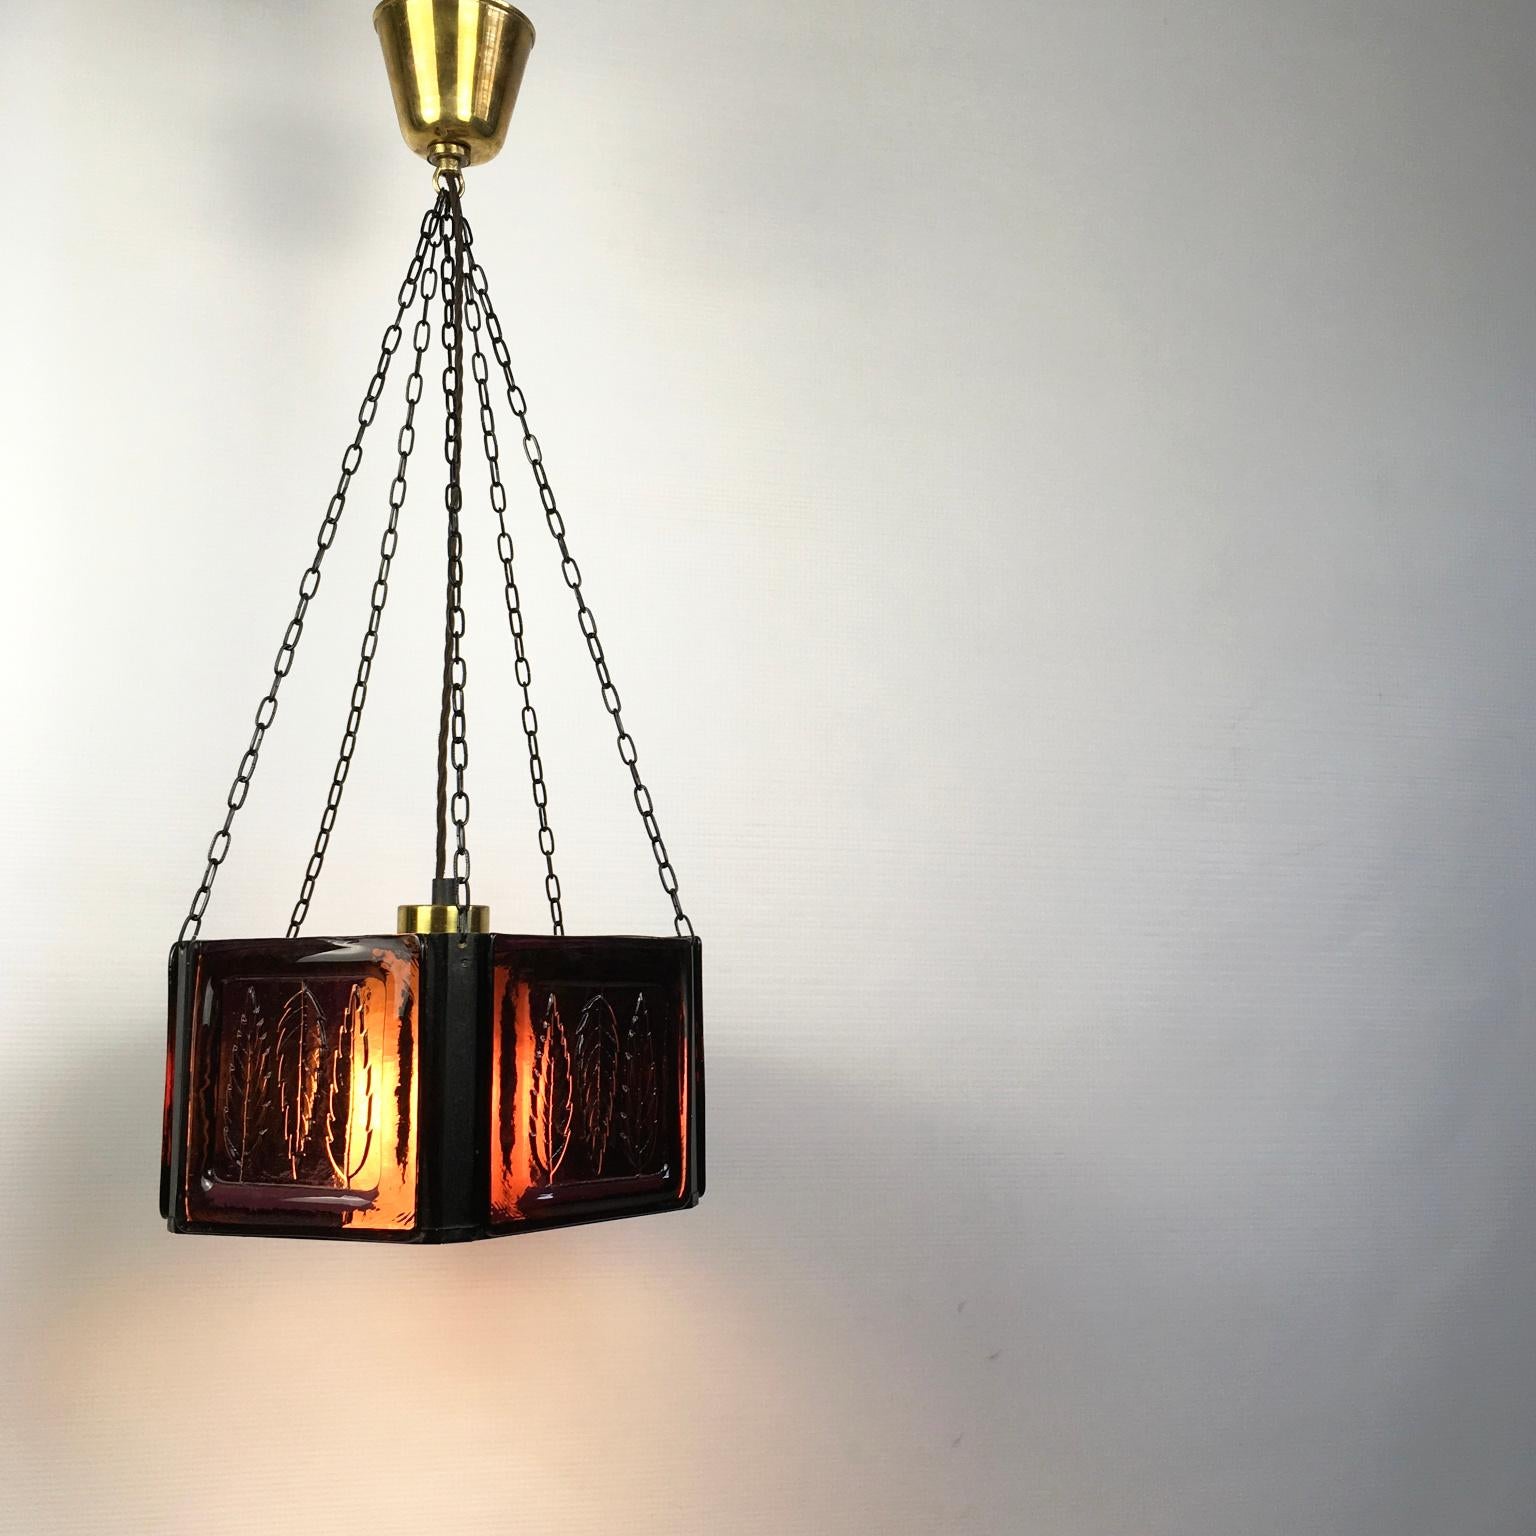 Pendant Lamp by Erik Höglund with Purple Glass for Boda Glasburk, Sweden, 1960s For Sale 3